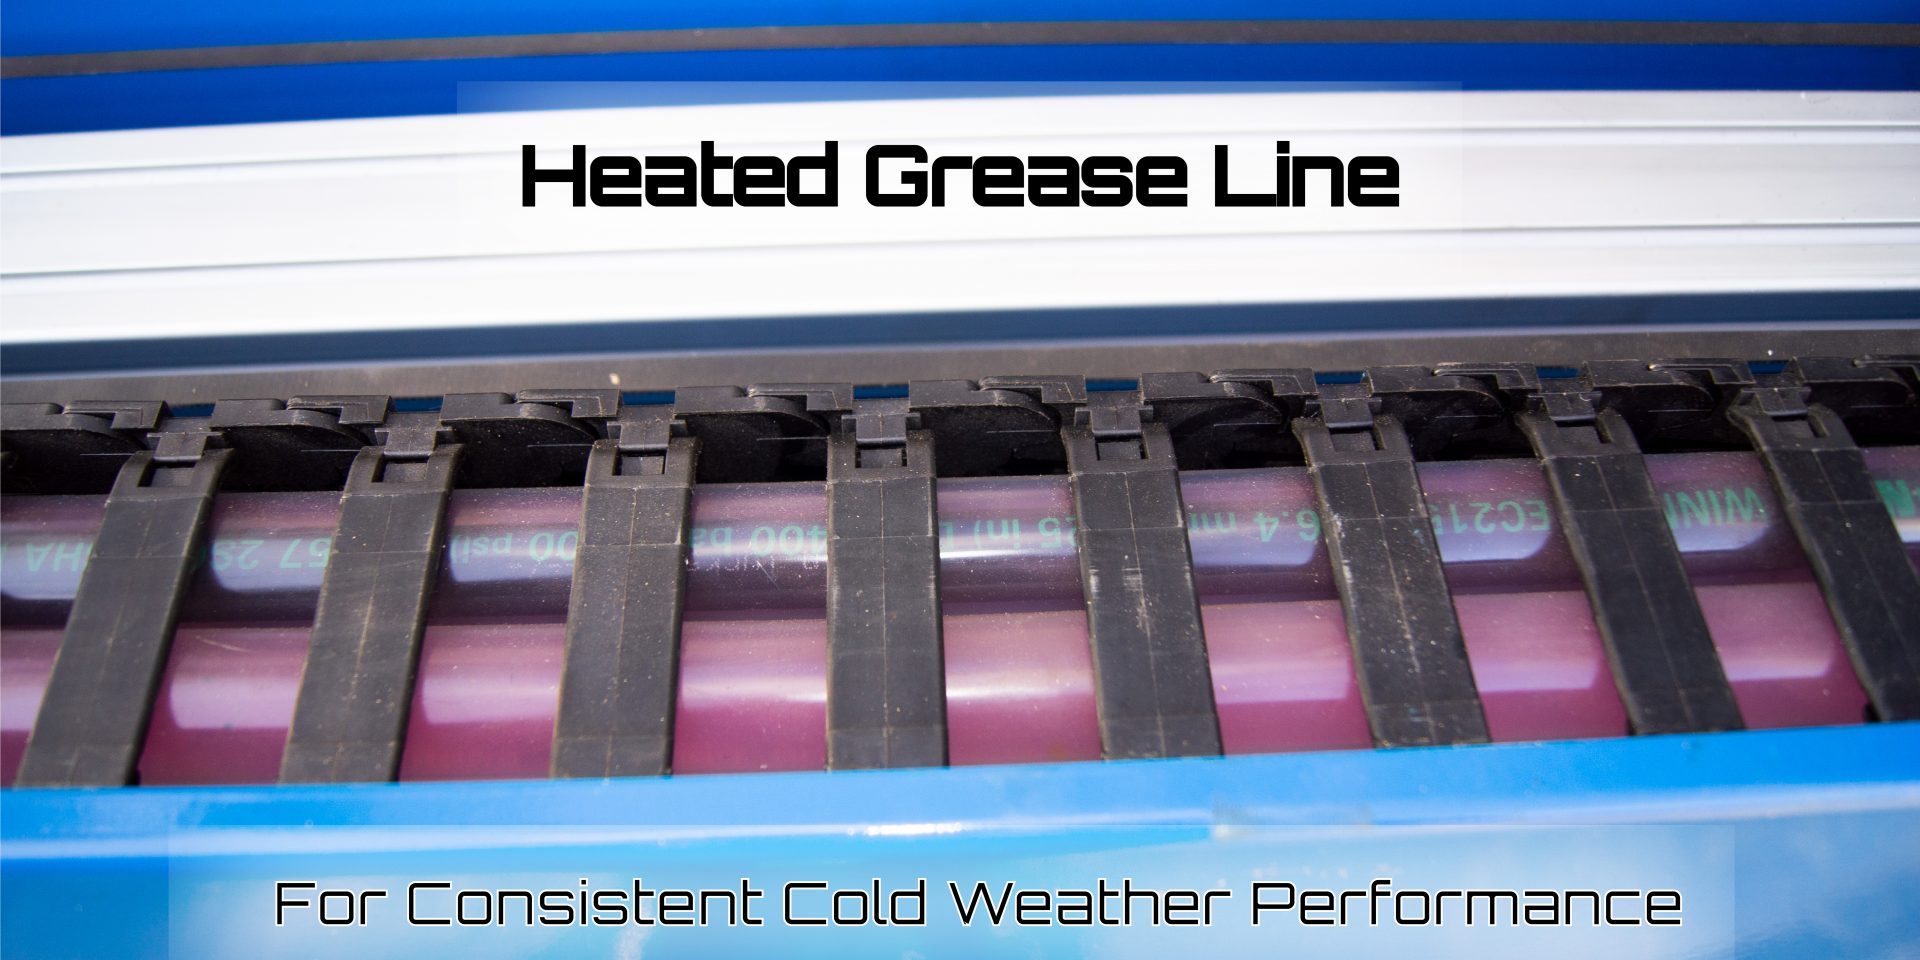 Heated Grease Line